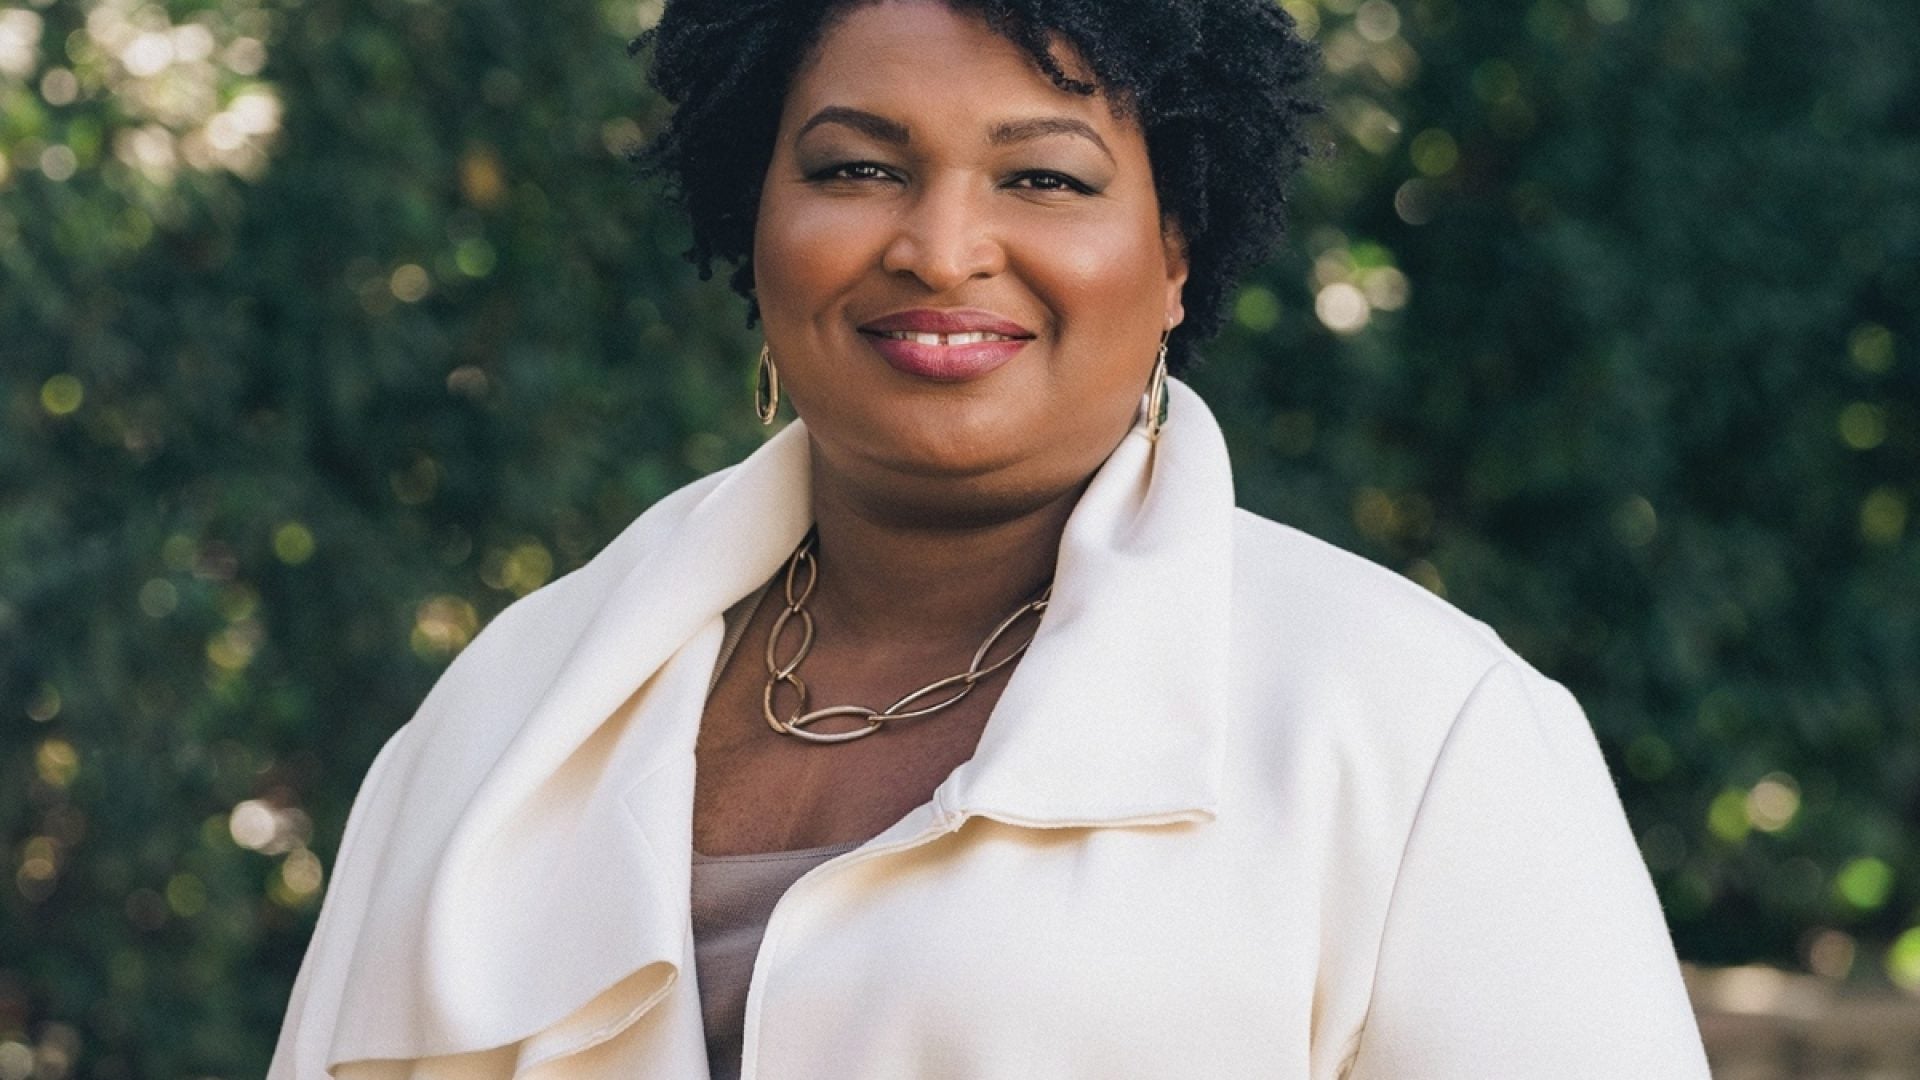 Stacey Abrams Shares Lessons of Perserverance in New Children’s Book